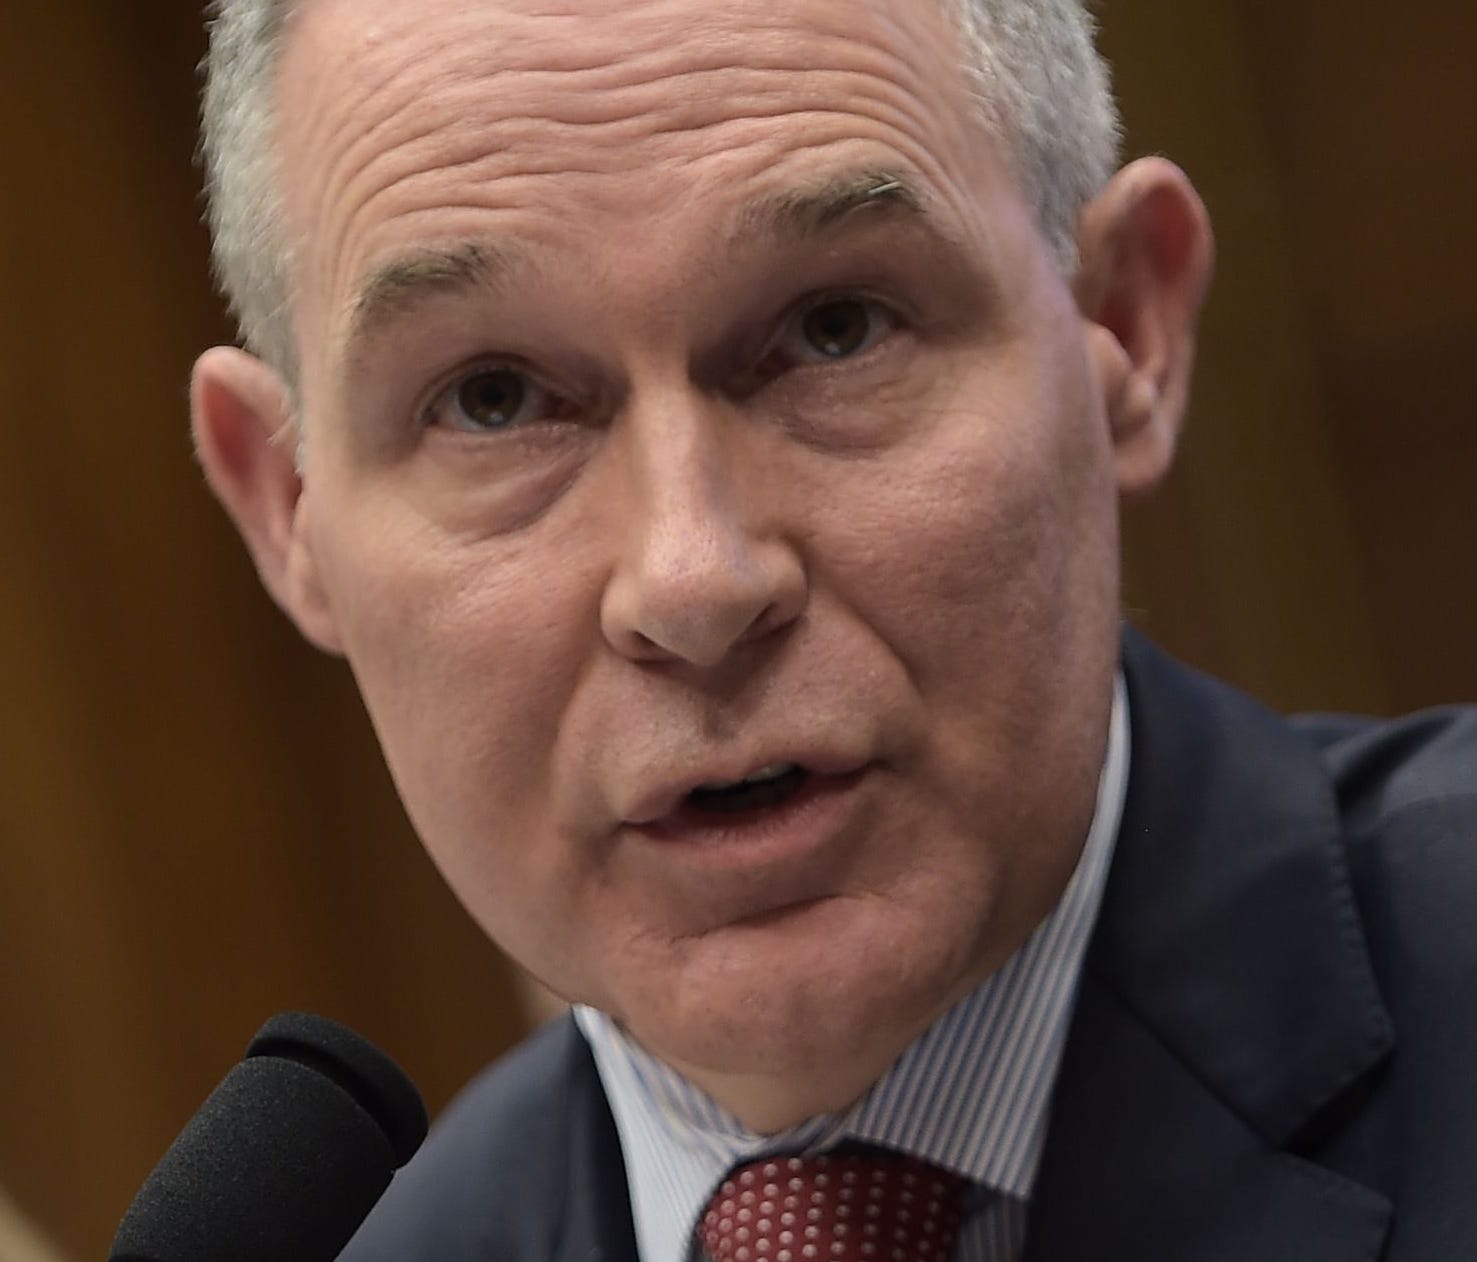 Environmental Protection Agency(EPA) chief Scott Pruitt(C) testifies before the House Energy and Commerce Committee after ethics scandals on April 26, 2018 on Capitol Hill in Washington,DC.